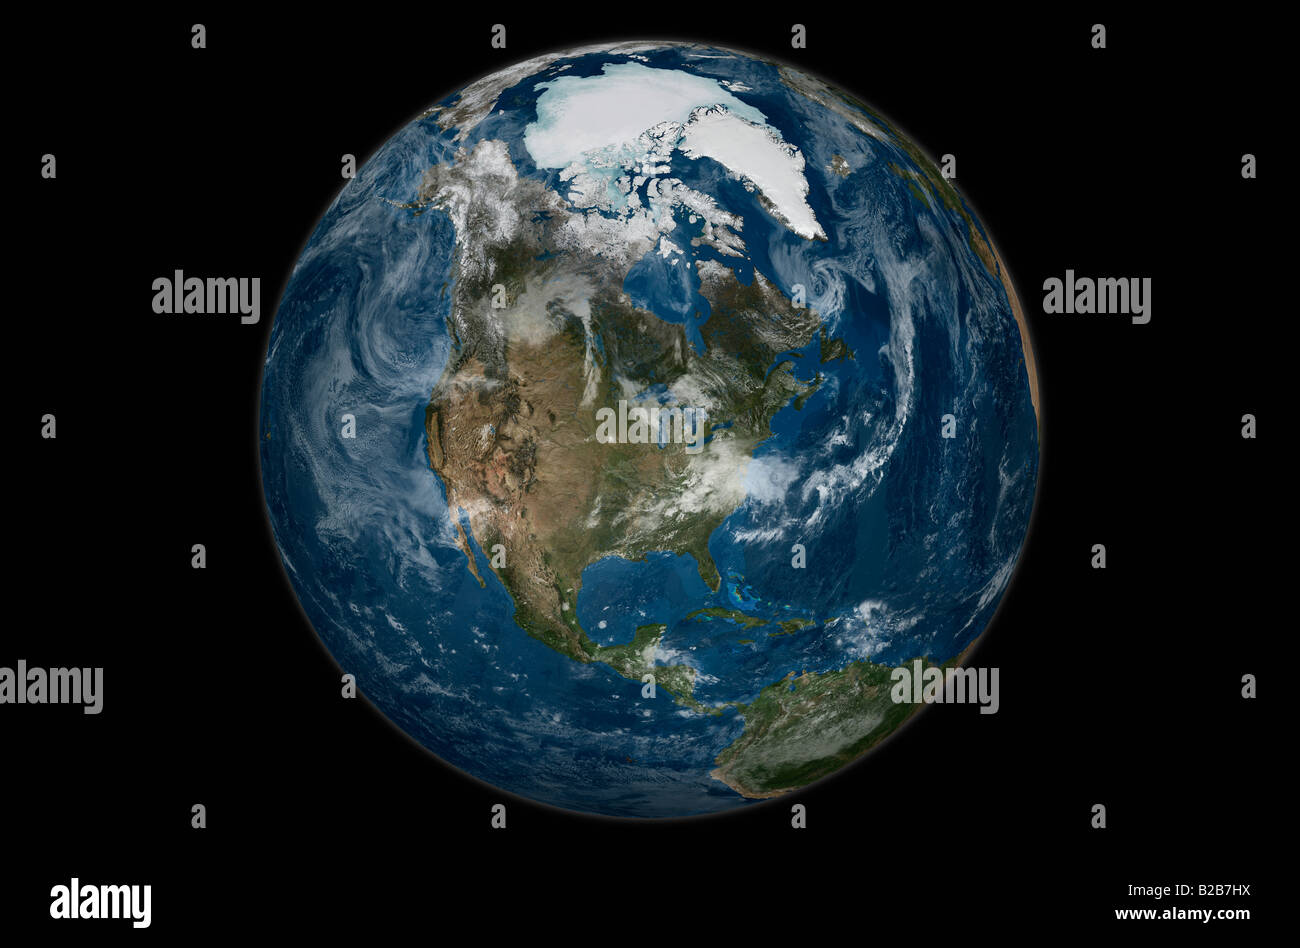 This image shows a view of the Earth on September 21, 2005 with the full Arctic region visible. Stock Photo